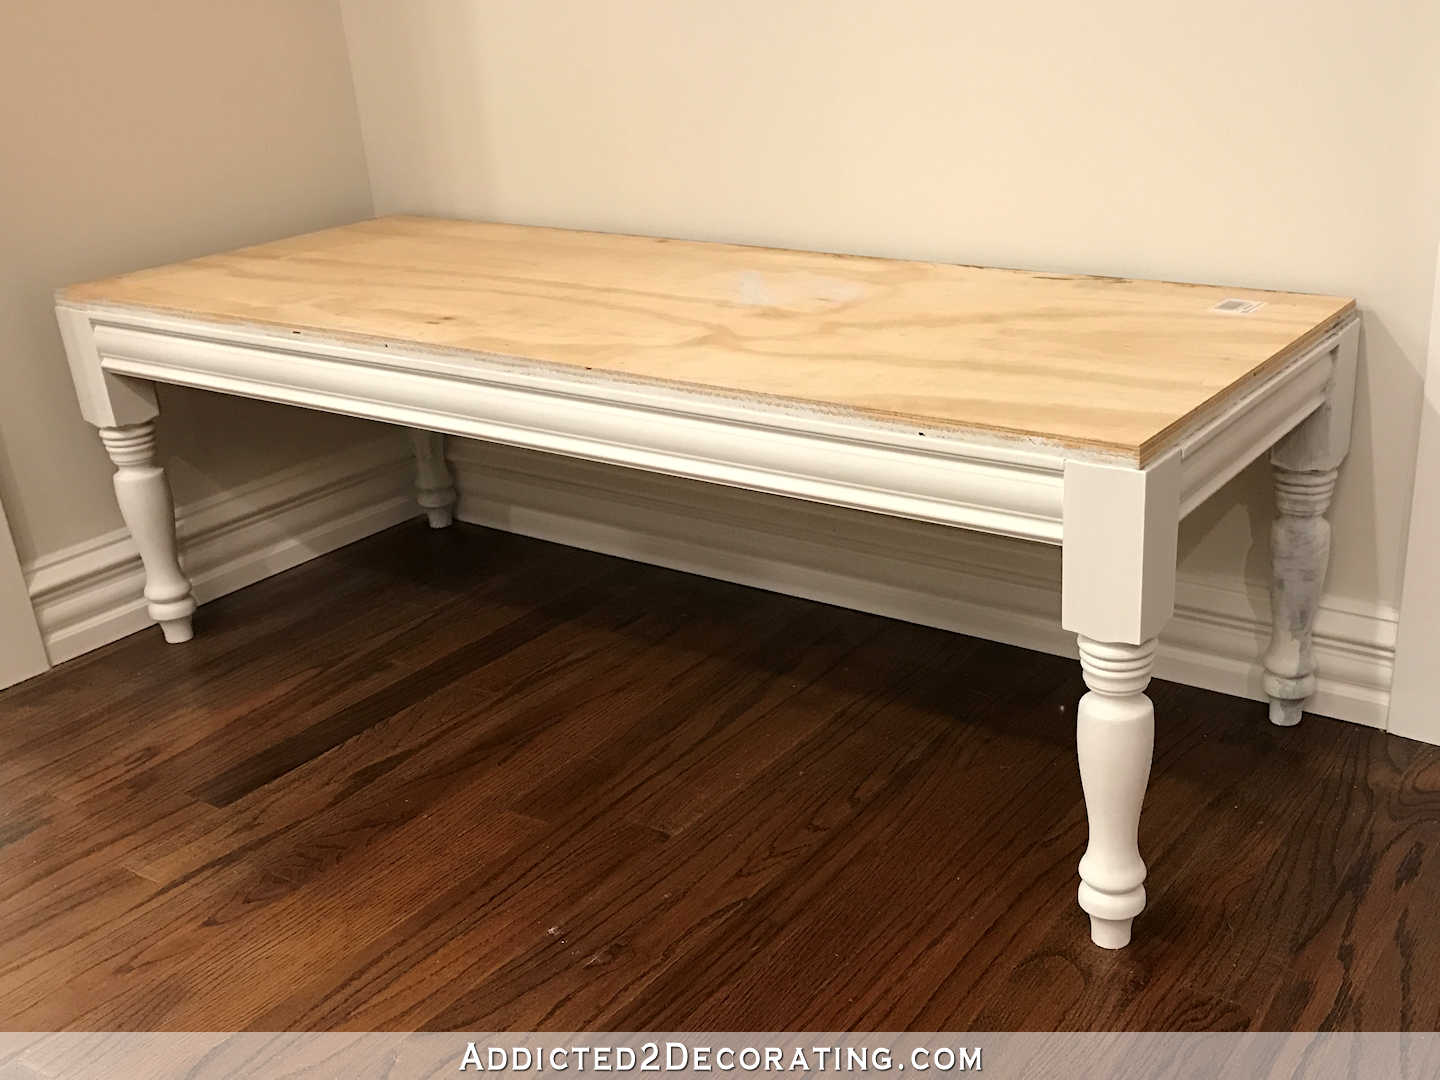 DIY Upholstered Dining Room Bench – How To Build The Frame